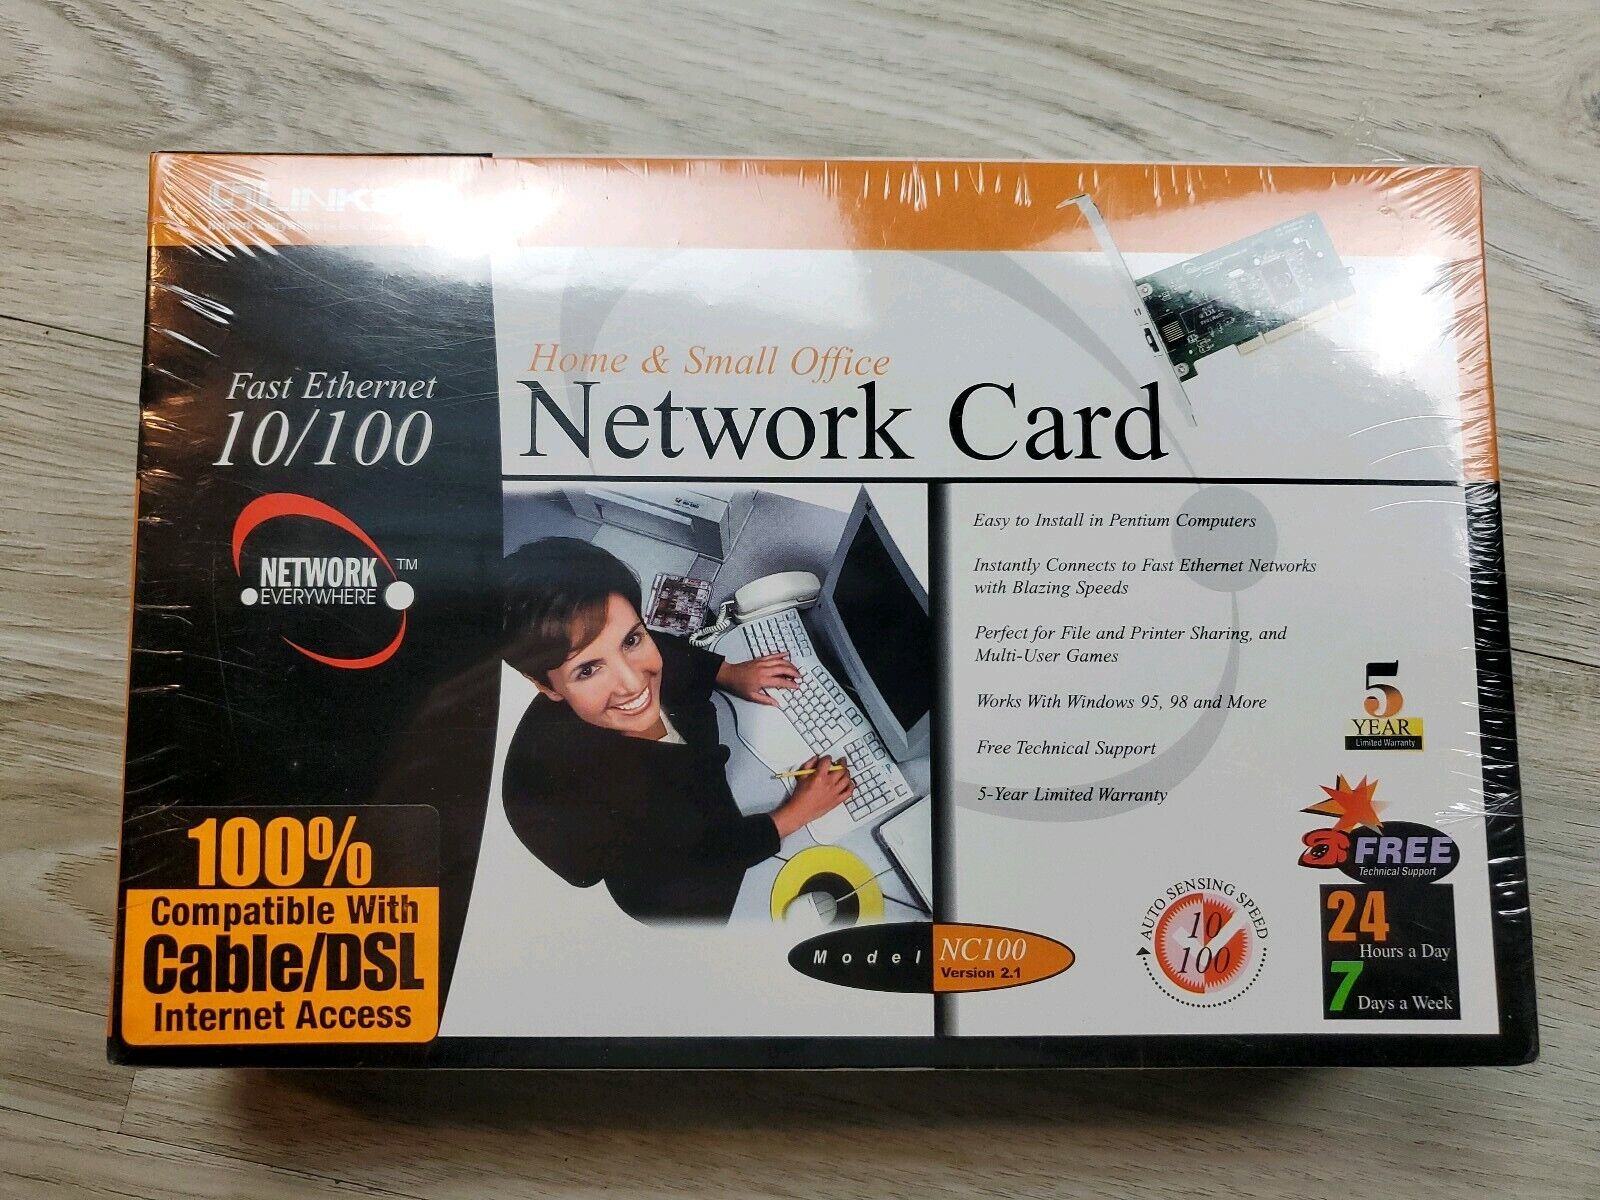 Linksys Network Card Model NC100 CAT 5 100% compatible with cable/DSL internet 